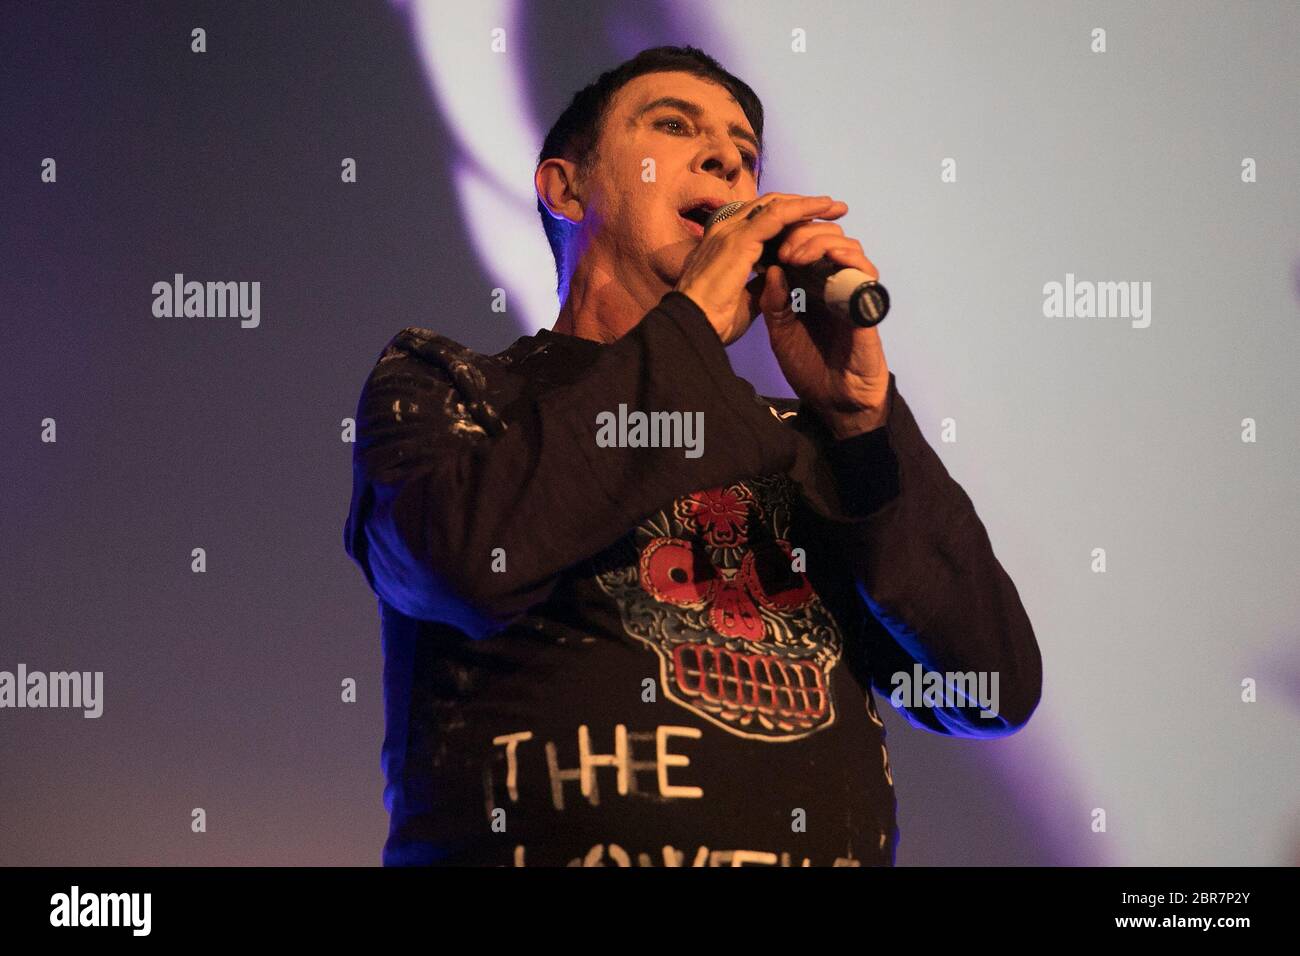 Singer Marc Almond performs at the Castro Theatre on October 26, 2019 in San Francisco, California. Stock Photo